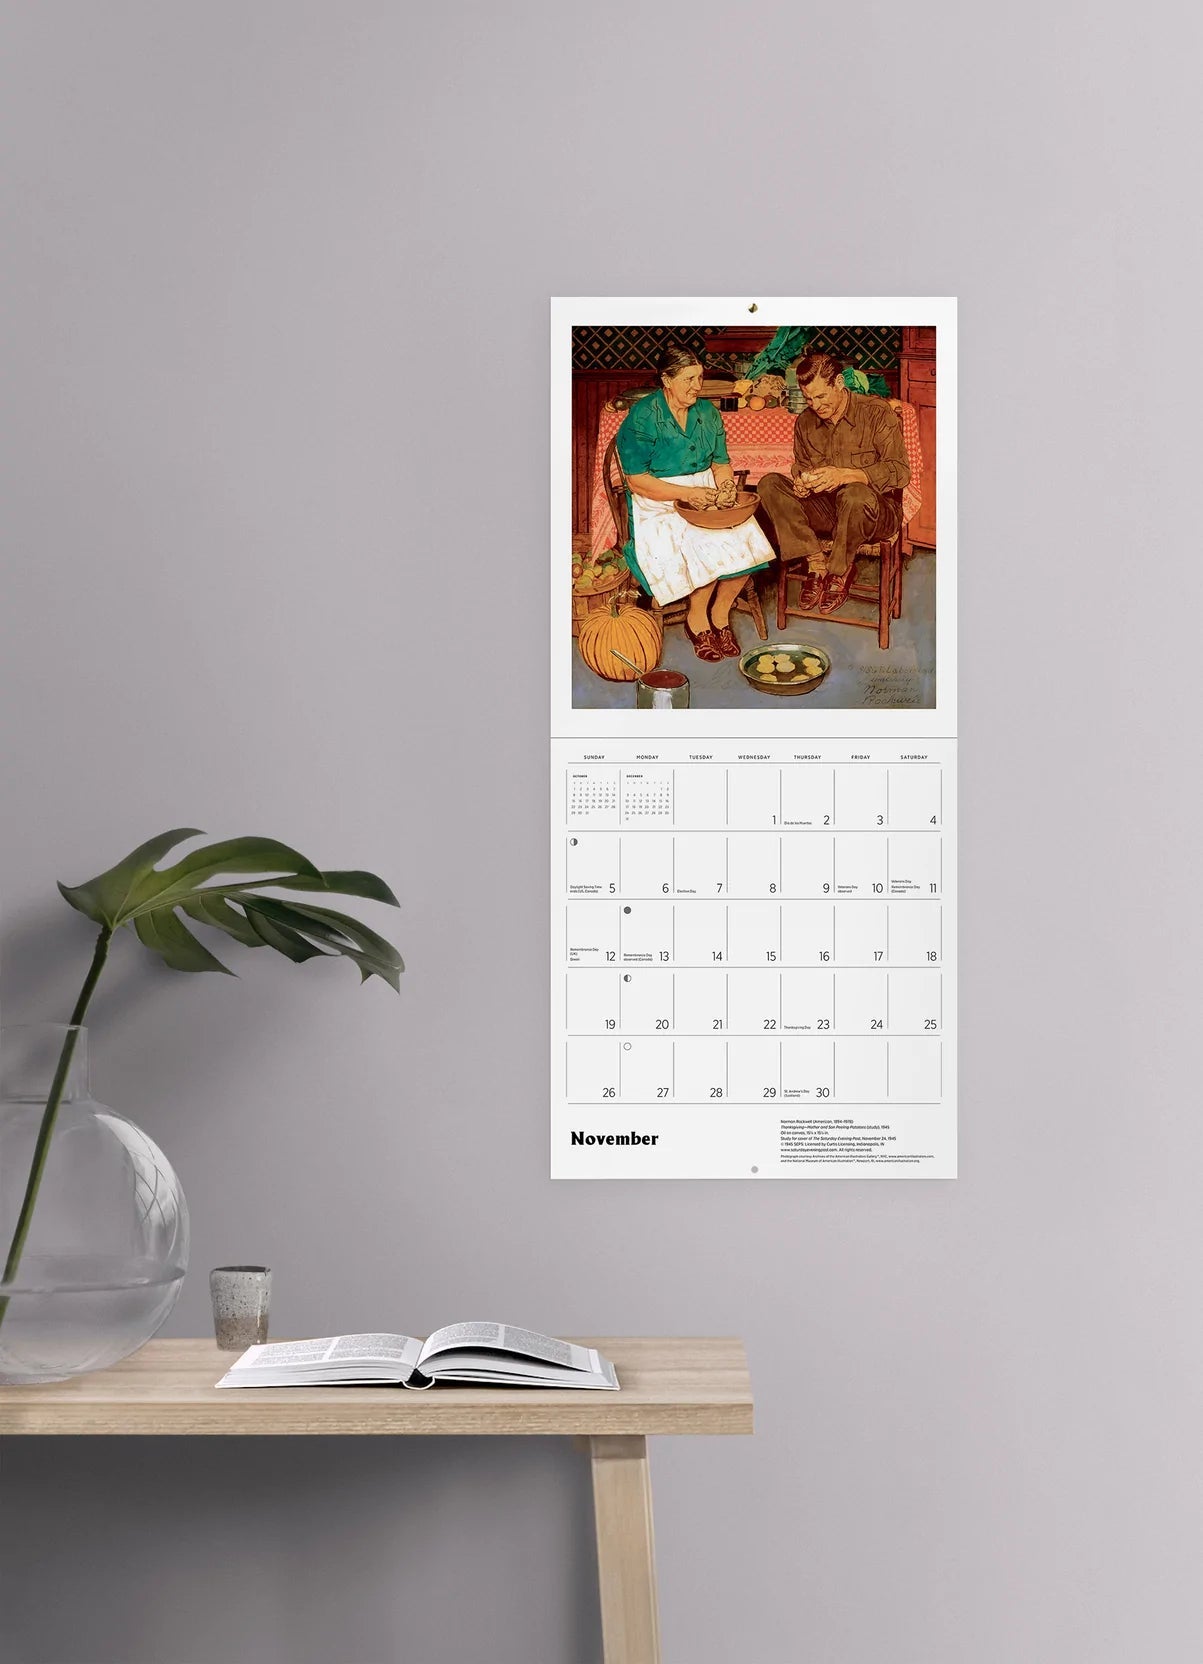 2023 Norman Rockwell: The Saturday Evening Post - Square Wall Calendar